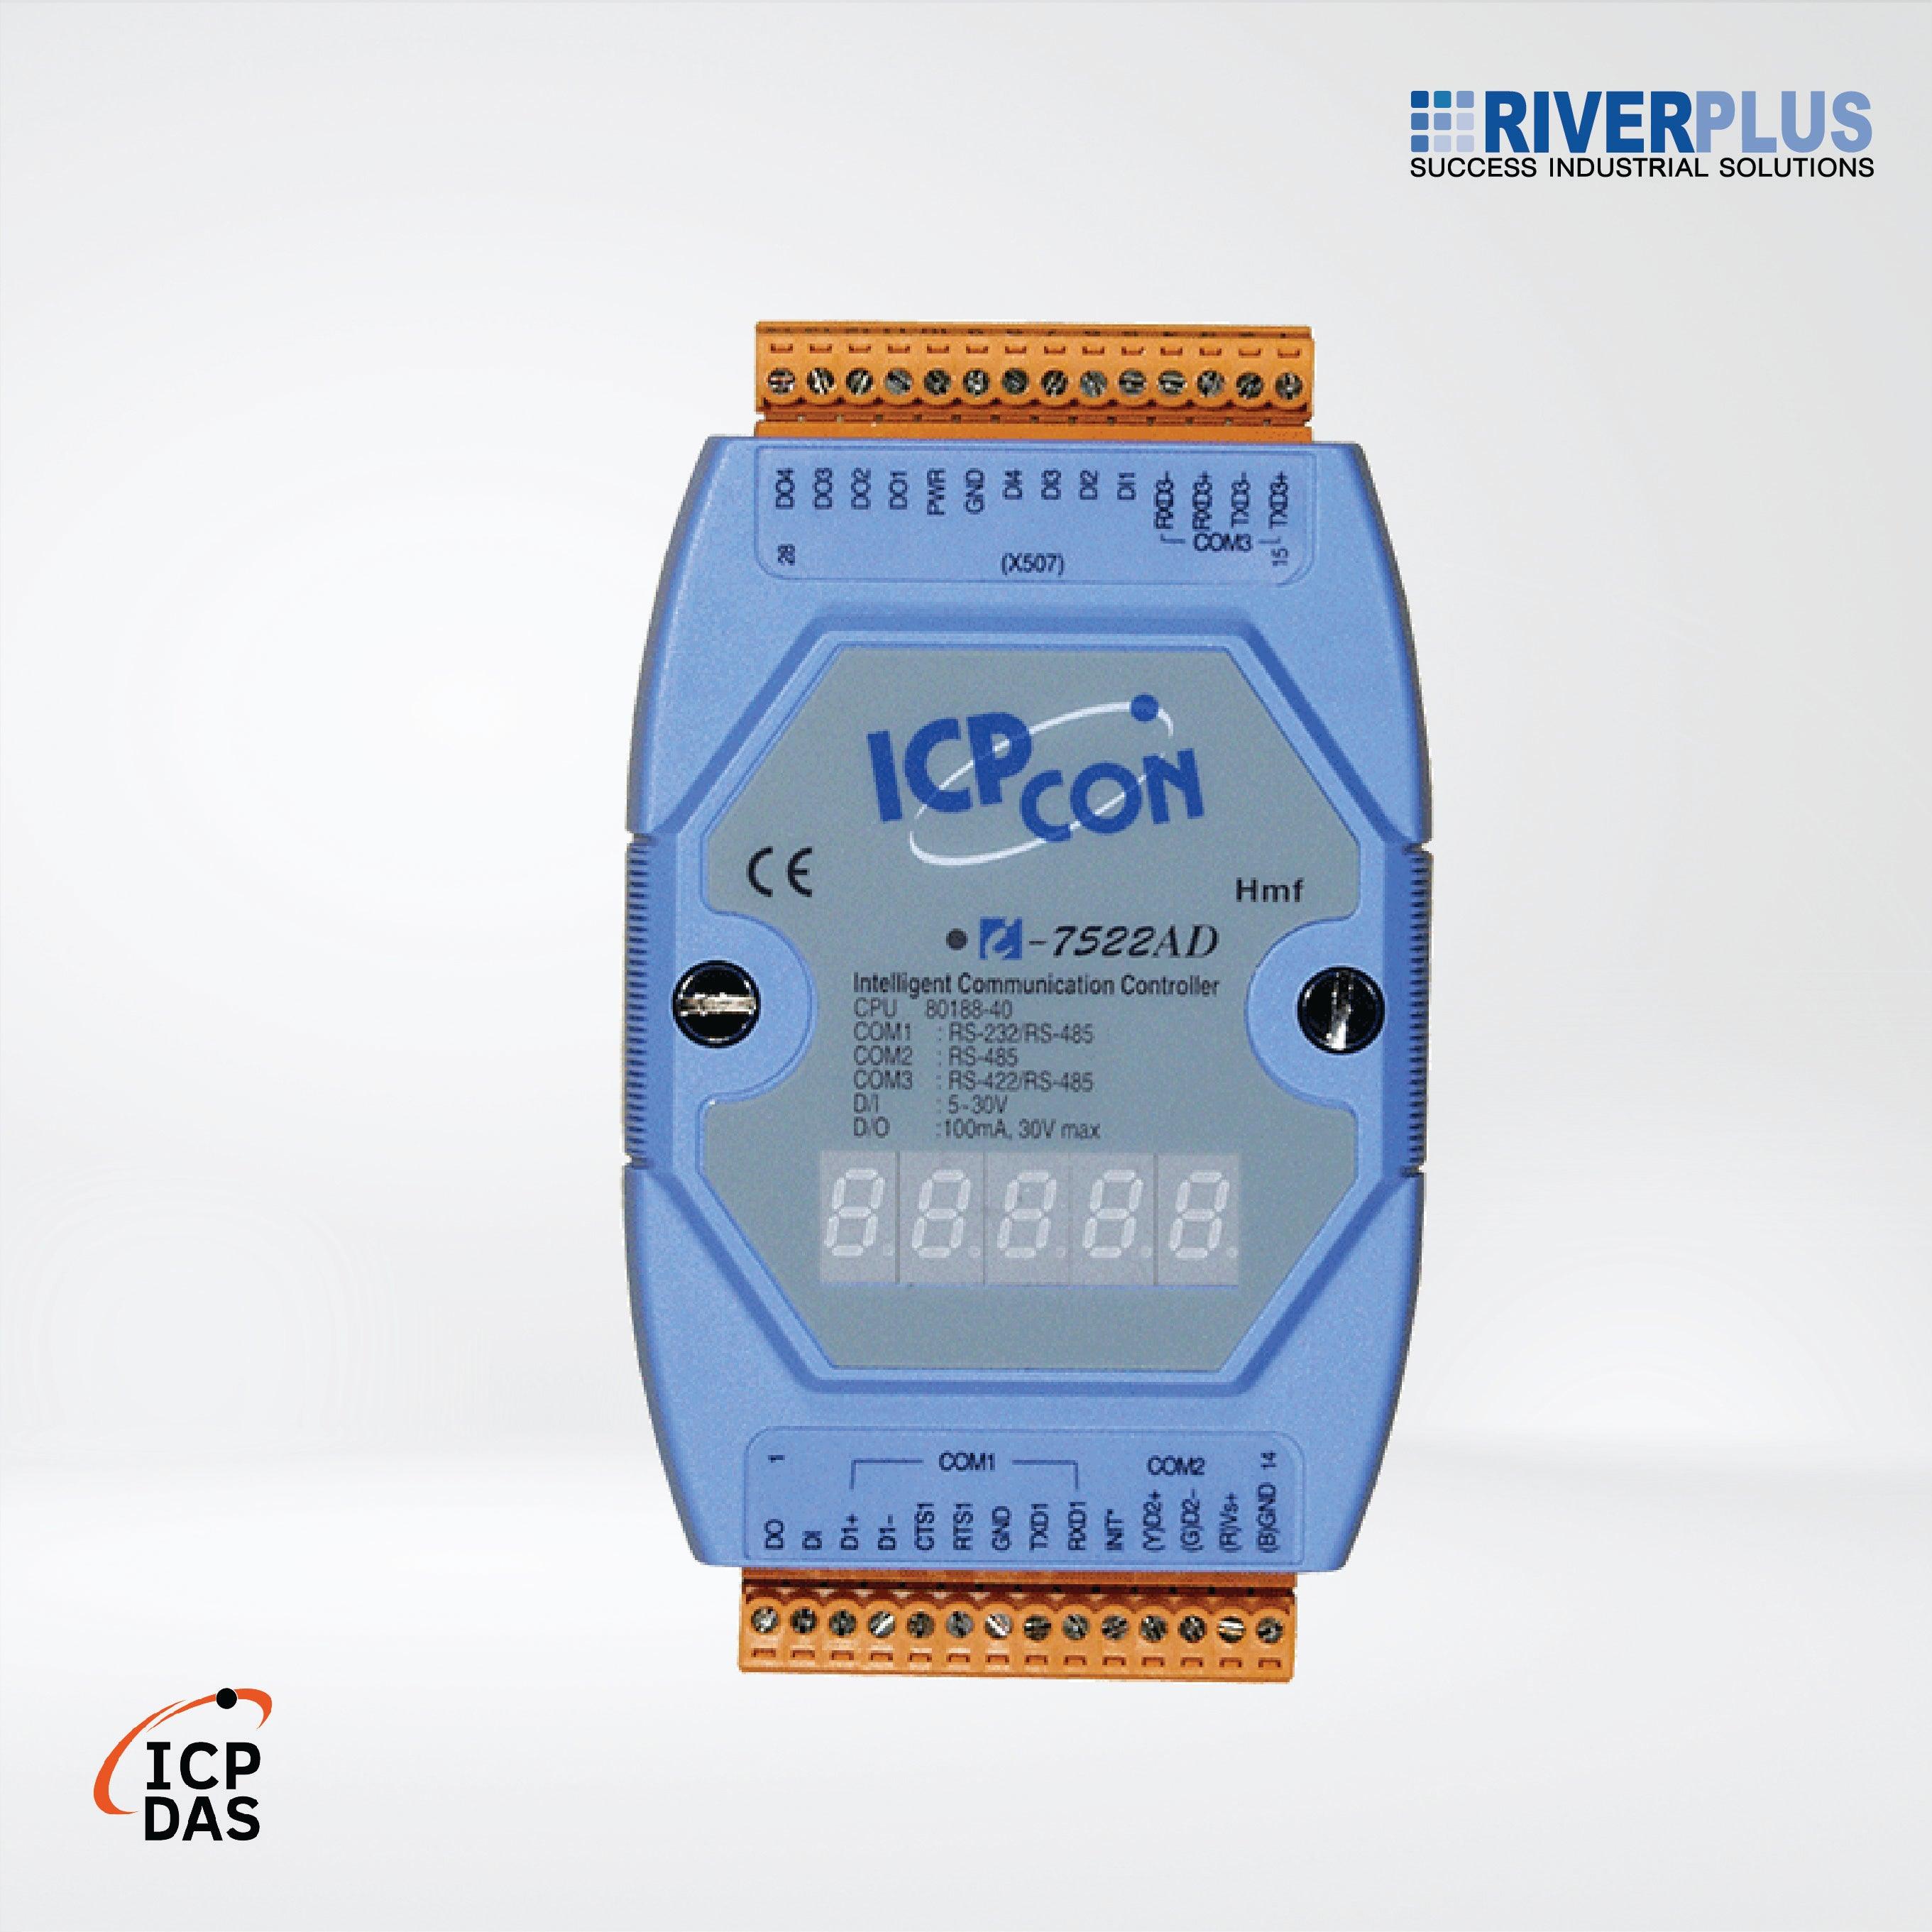 I-7522AD Addressable RS-485 to 2 x RS-232/RS-422/RS-485 Converter with 5 DI, 5 DO and 7-Segment LED Display (Blue Cover) - Riverplus